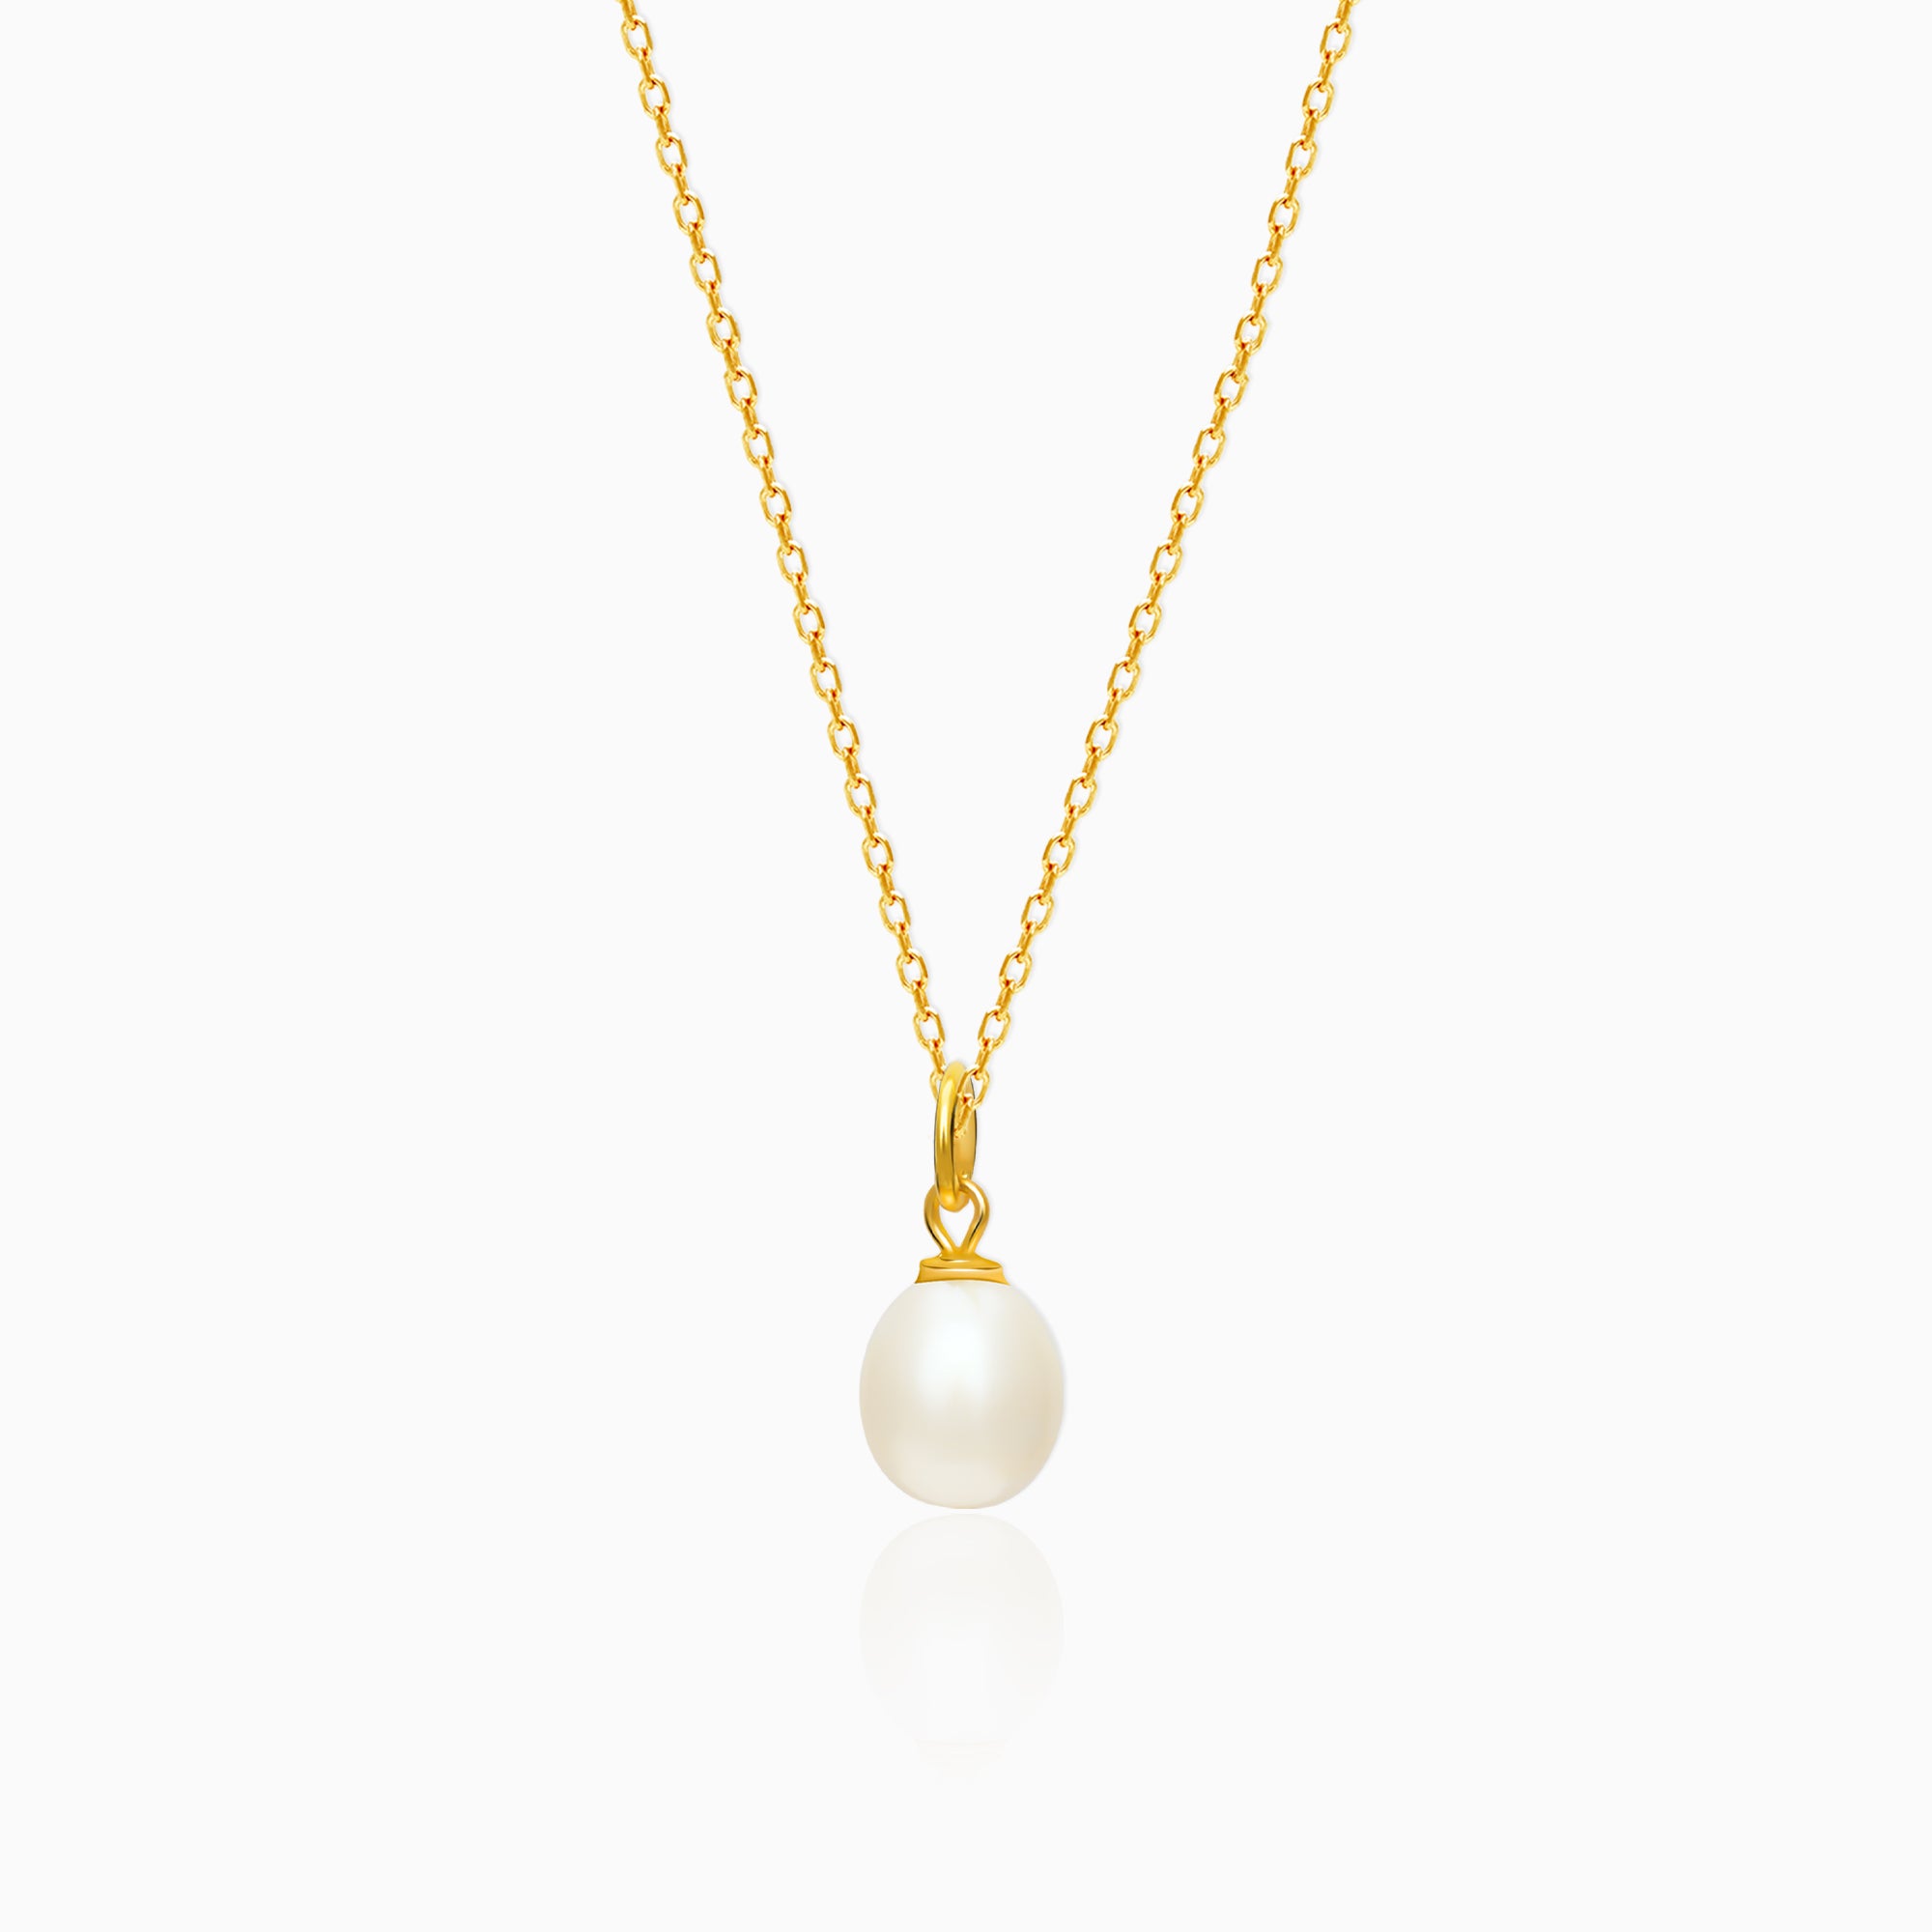 Saraa Dazzling Gold Plated White Colored Pearl Necklace for Women :  Amazon.in: Fashion